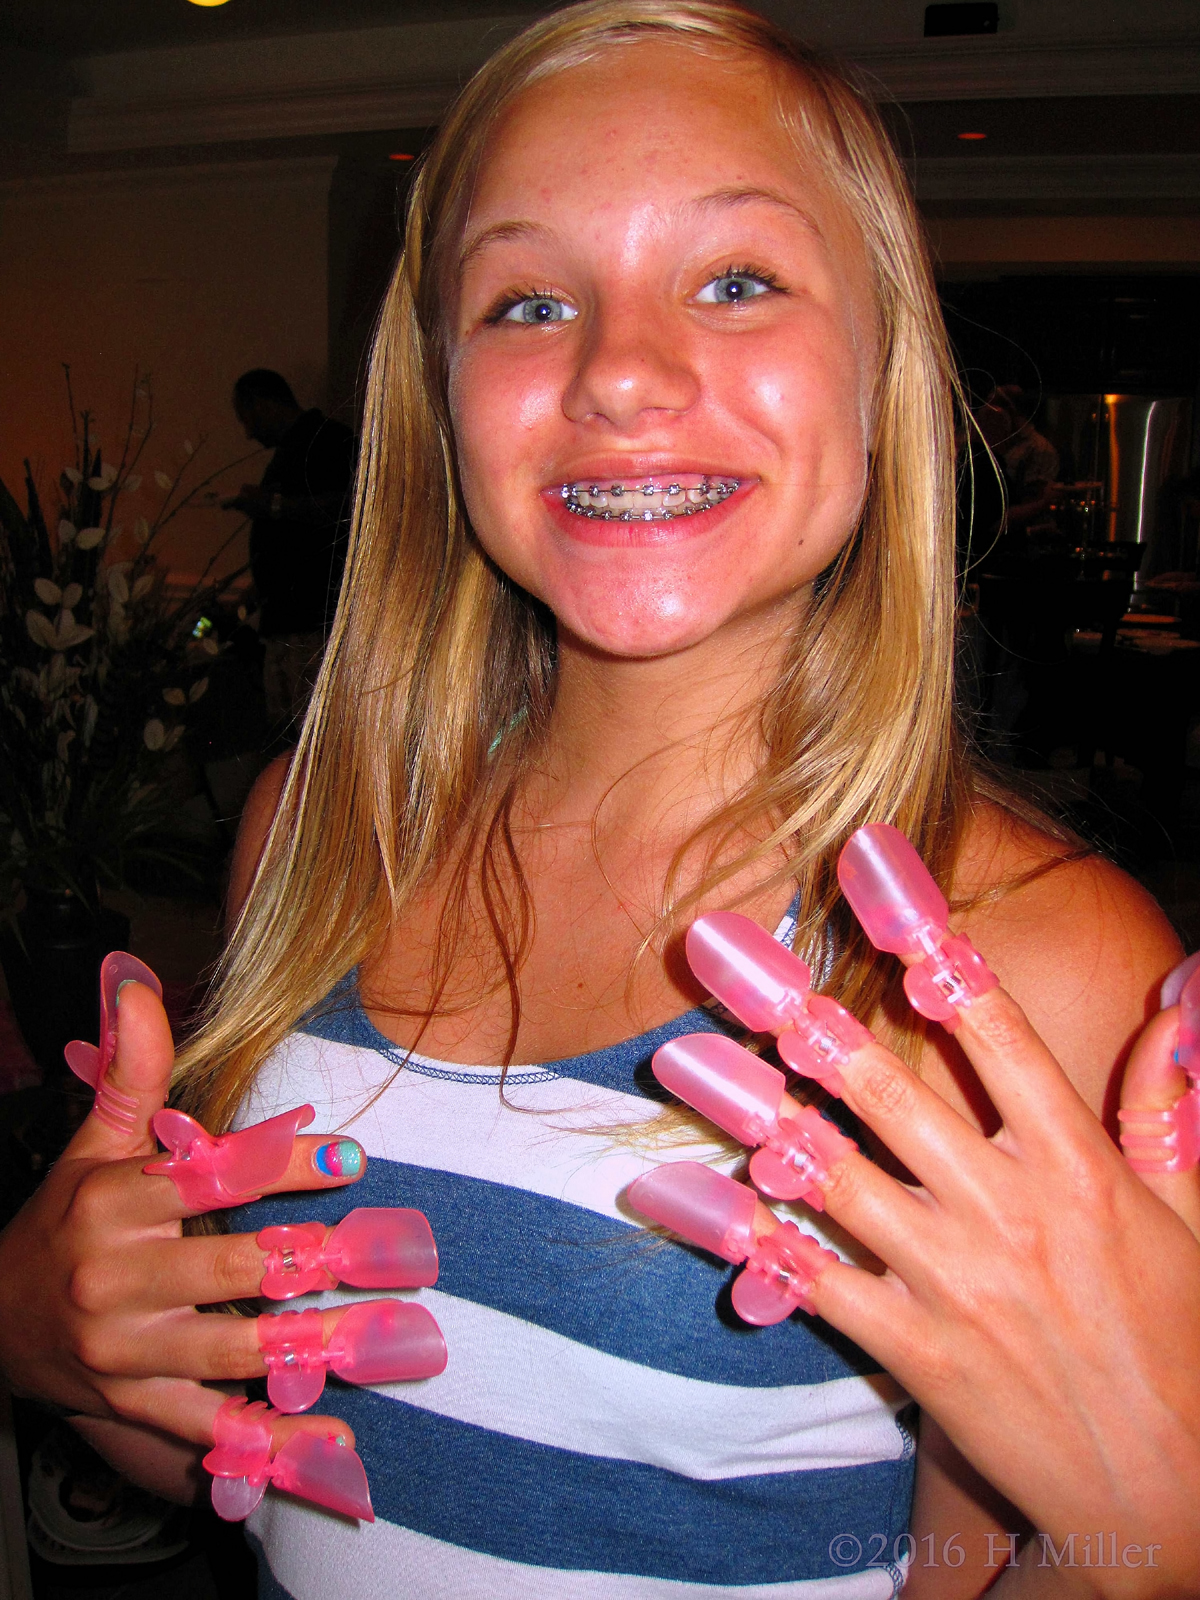 Looking Awesome In Her Manicure Protectors